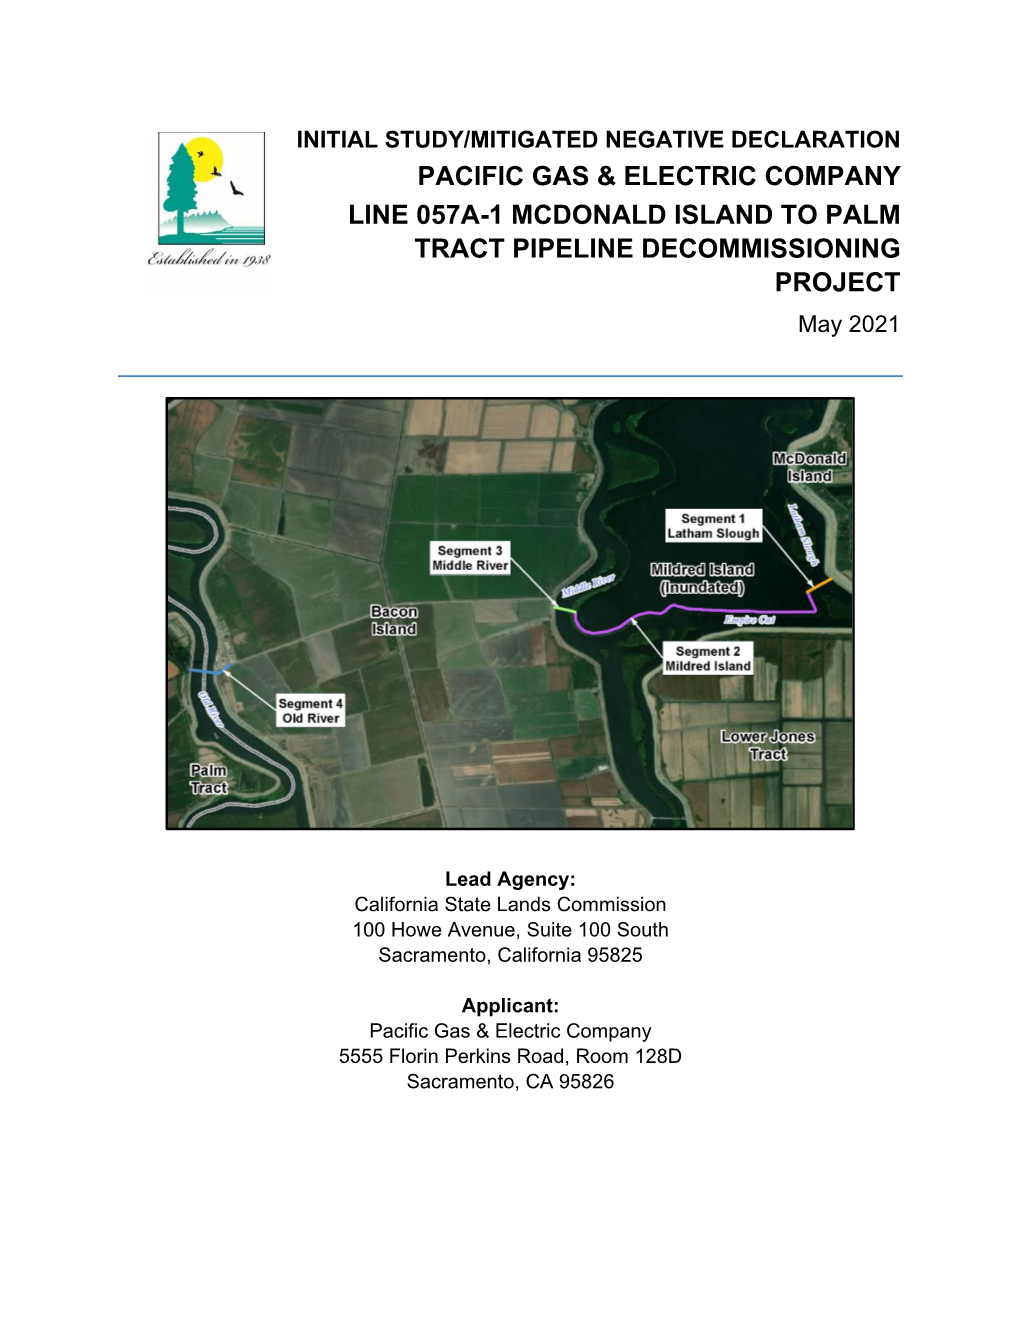 PG&E Line 057A-1 Pipeline Decommissioining Project